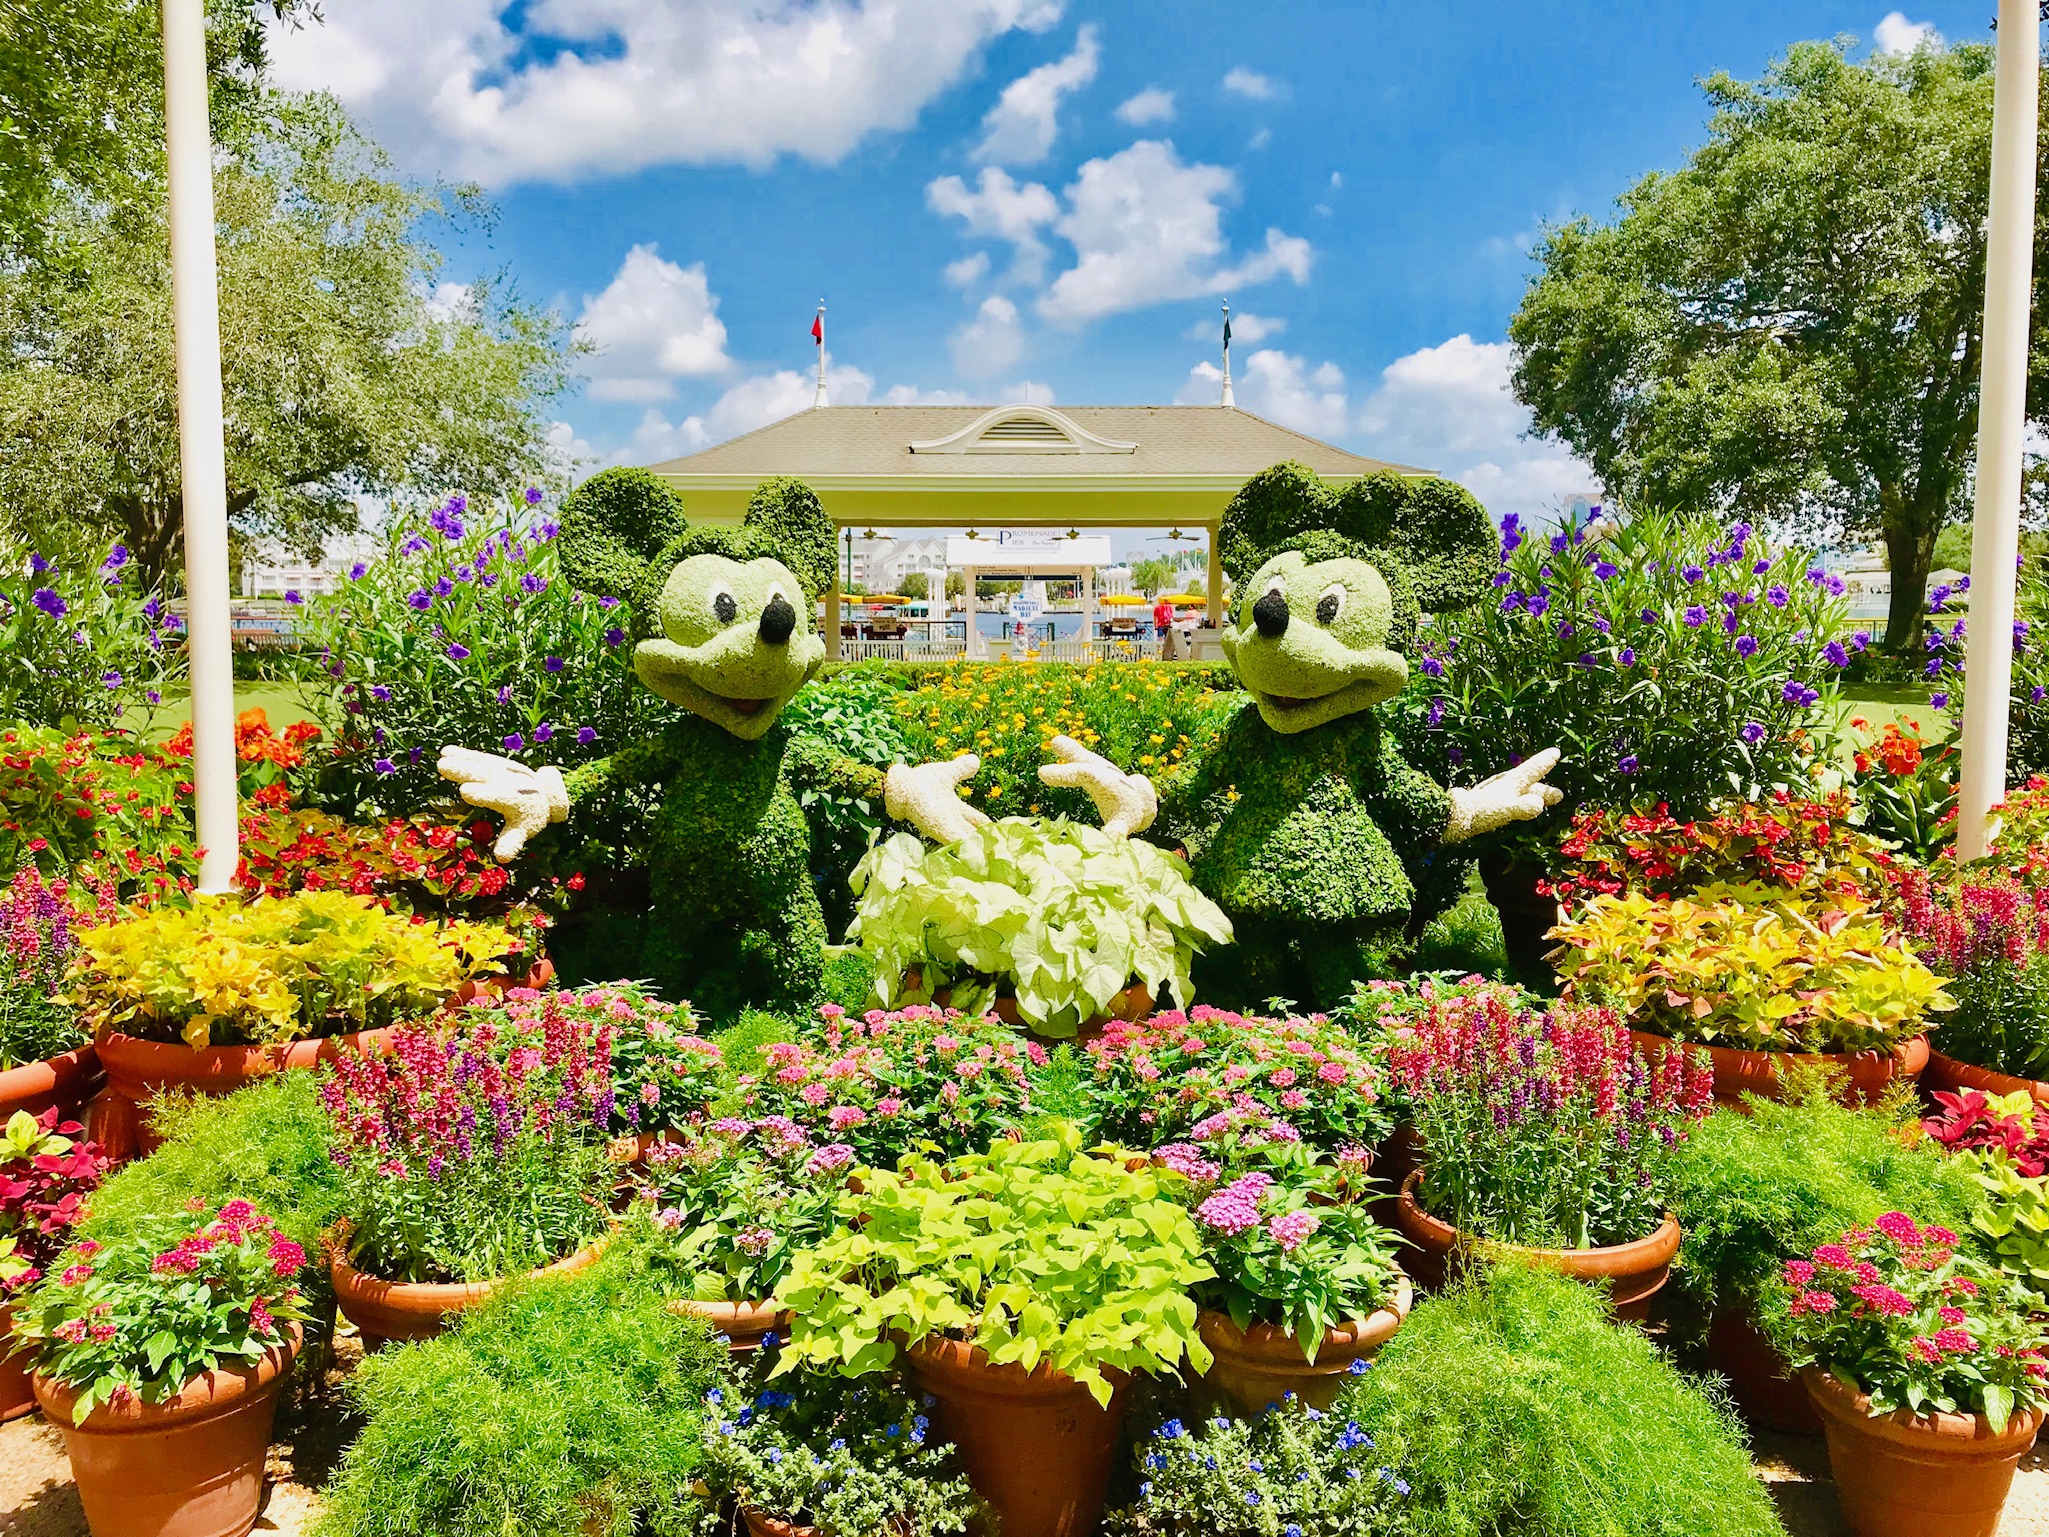 2023 Epcot Flower and Garden Festival Guide Dates, Menus, and more!